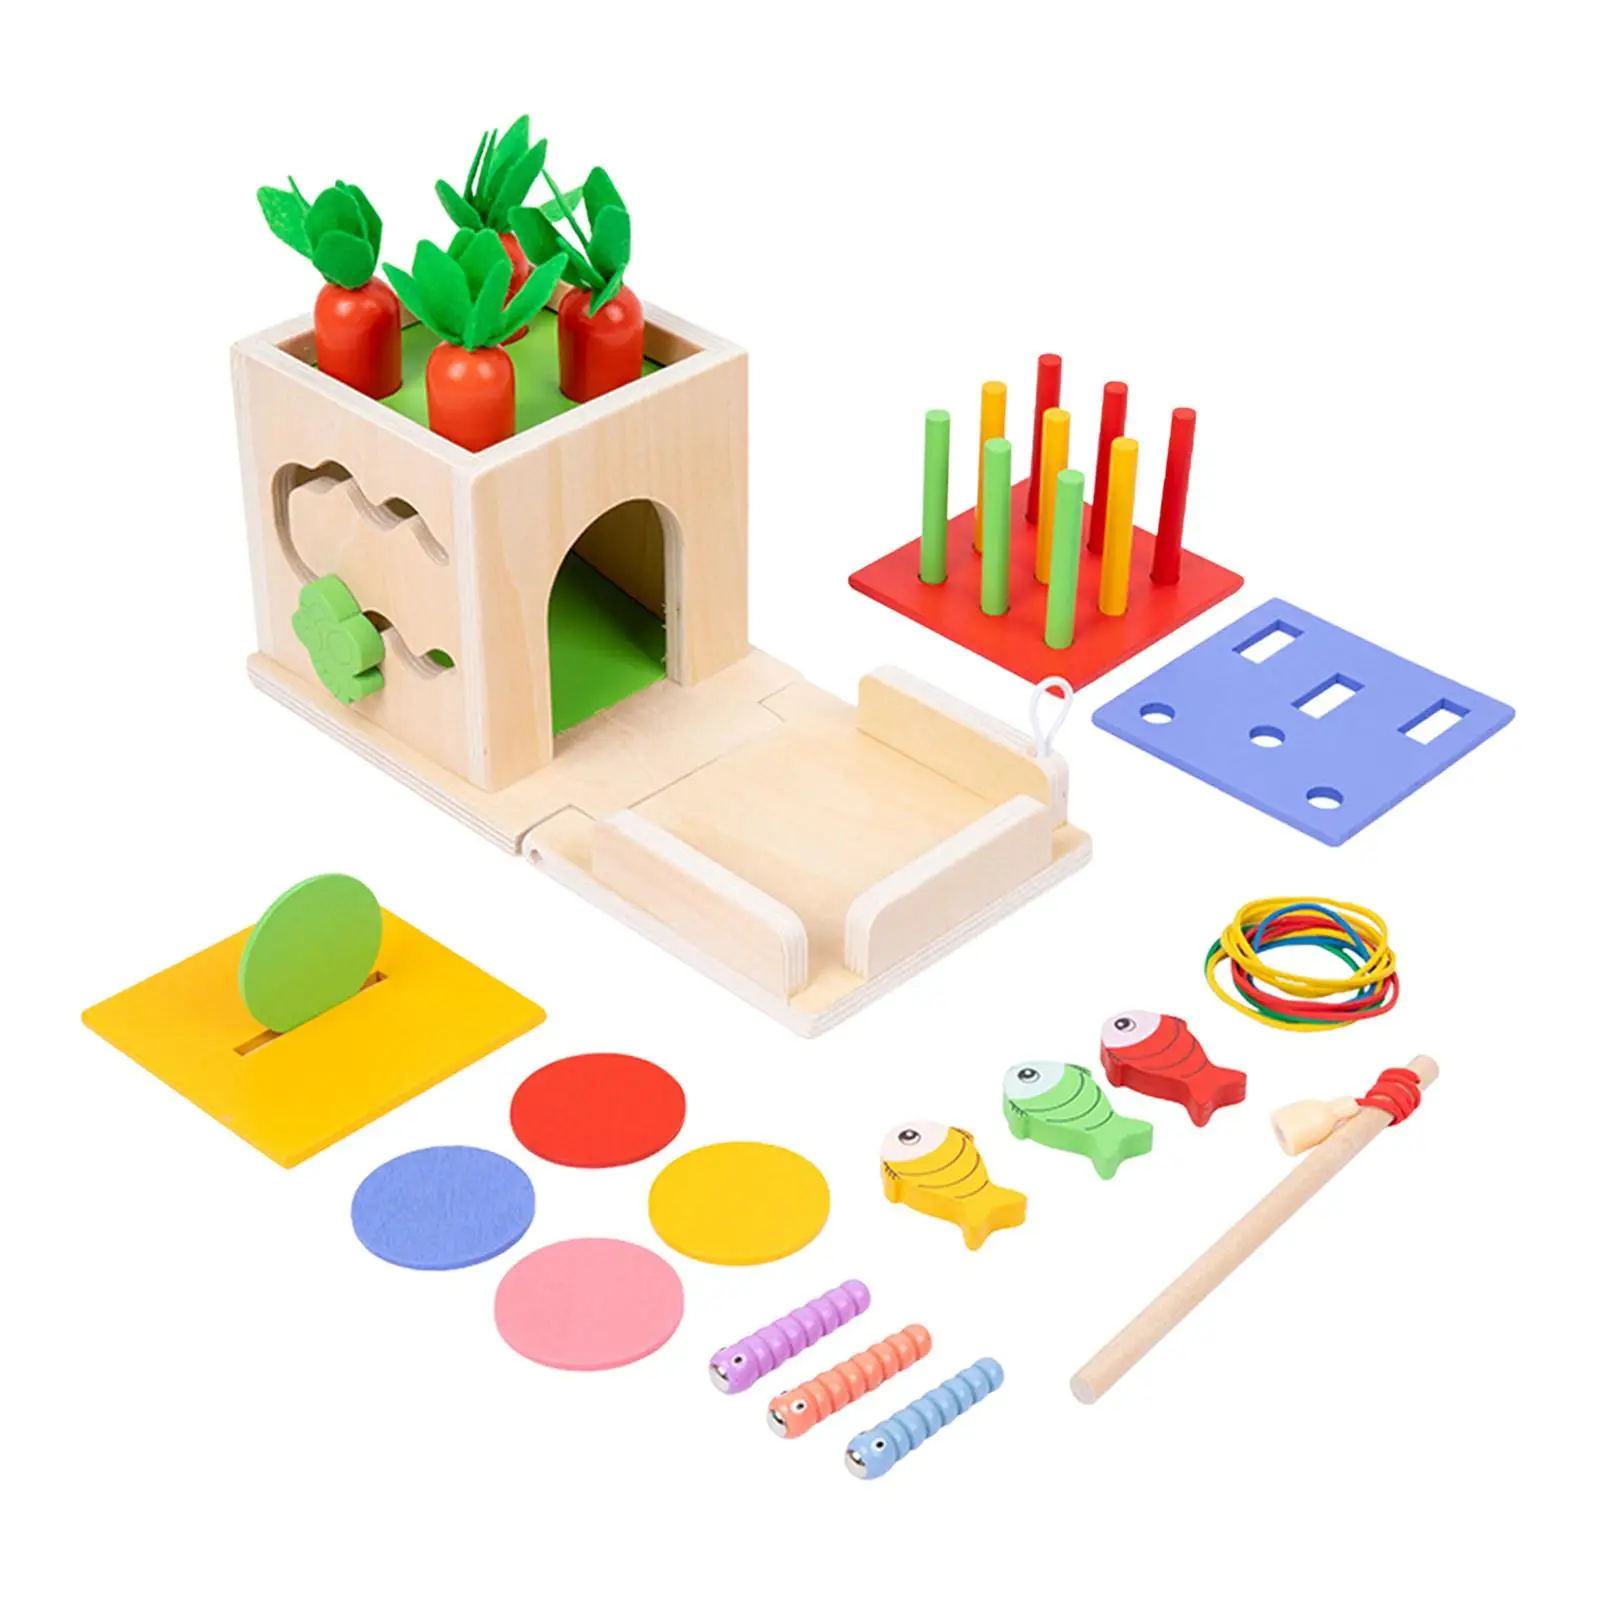 Montessori Toddler Play Kit Gear Toddler Educational Learning Toys Stacking Object Permanence Box for 1 2 3 Year Old 6 Months up